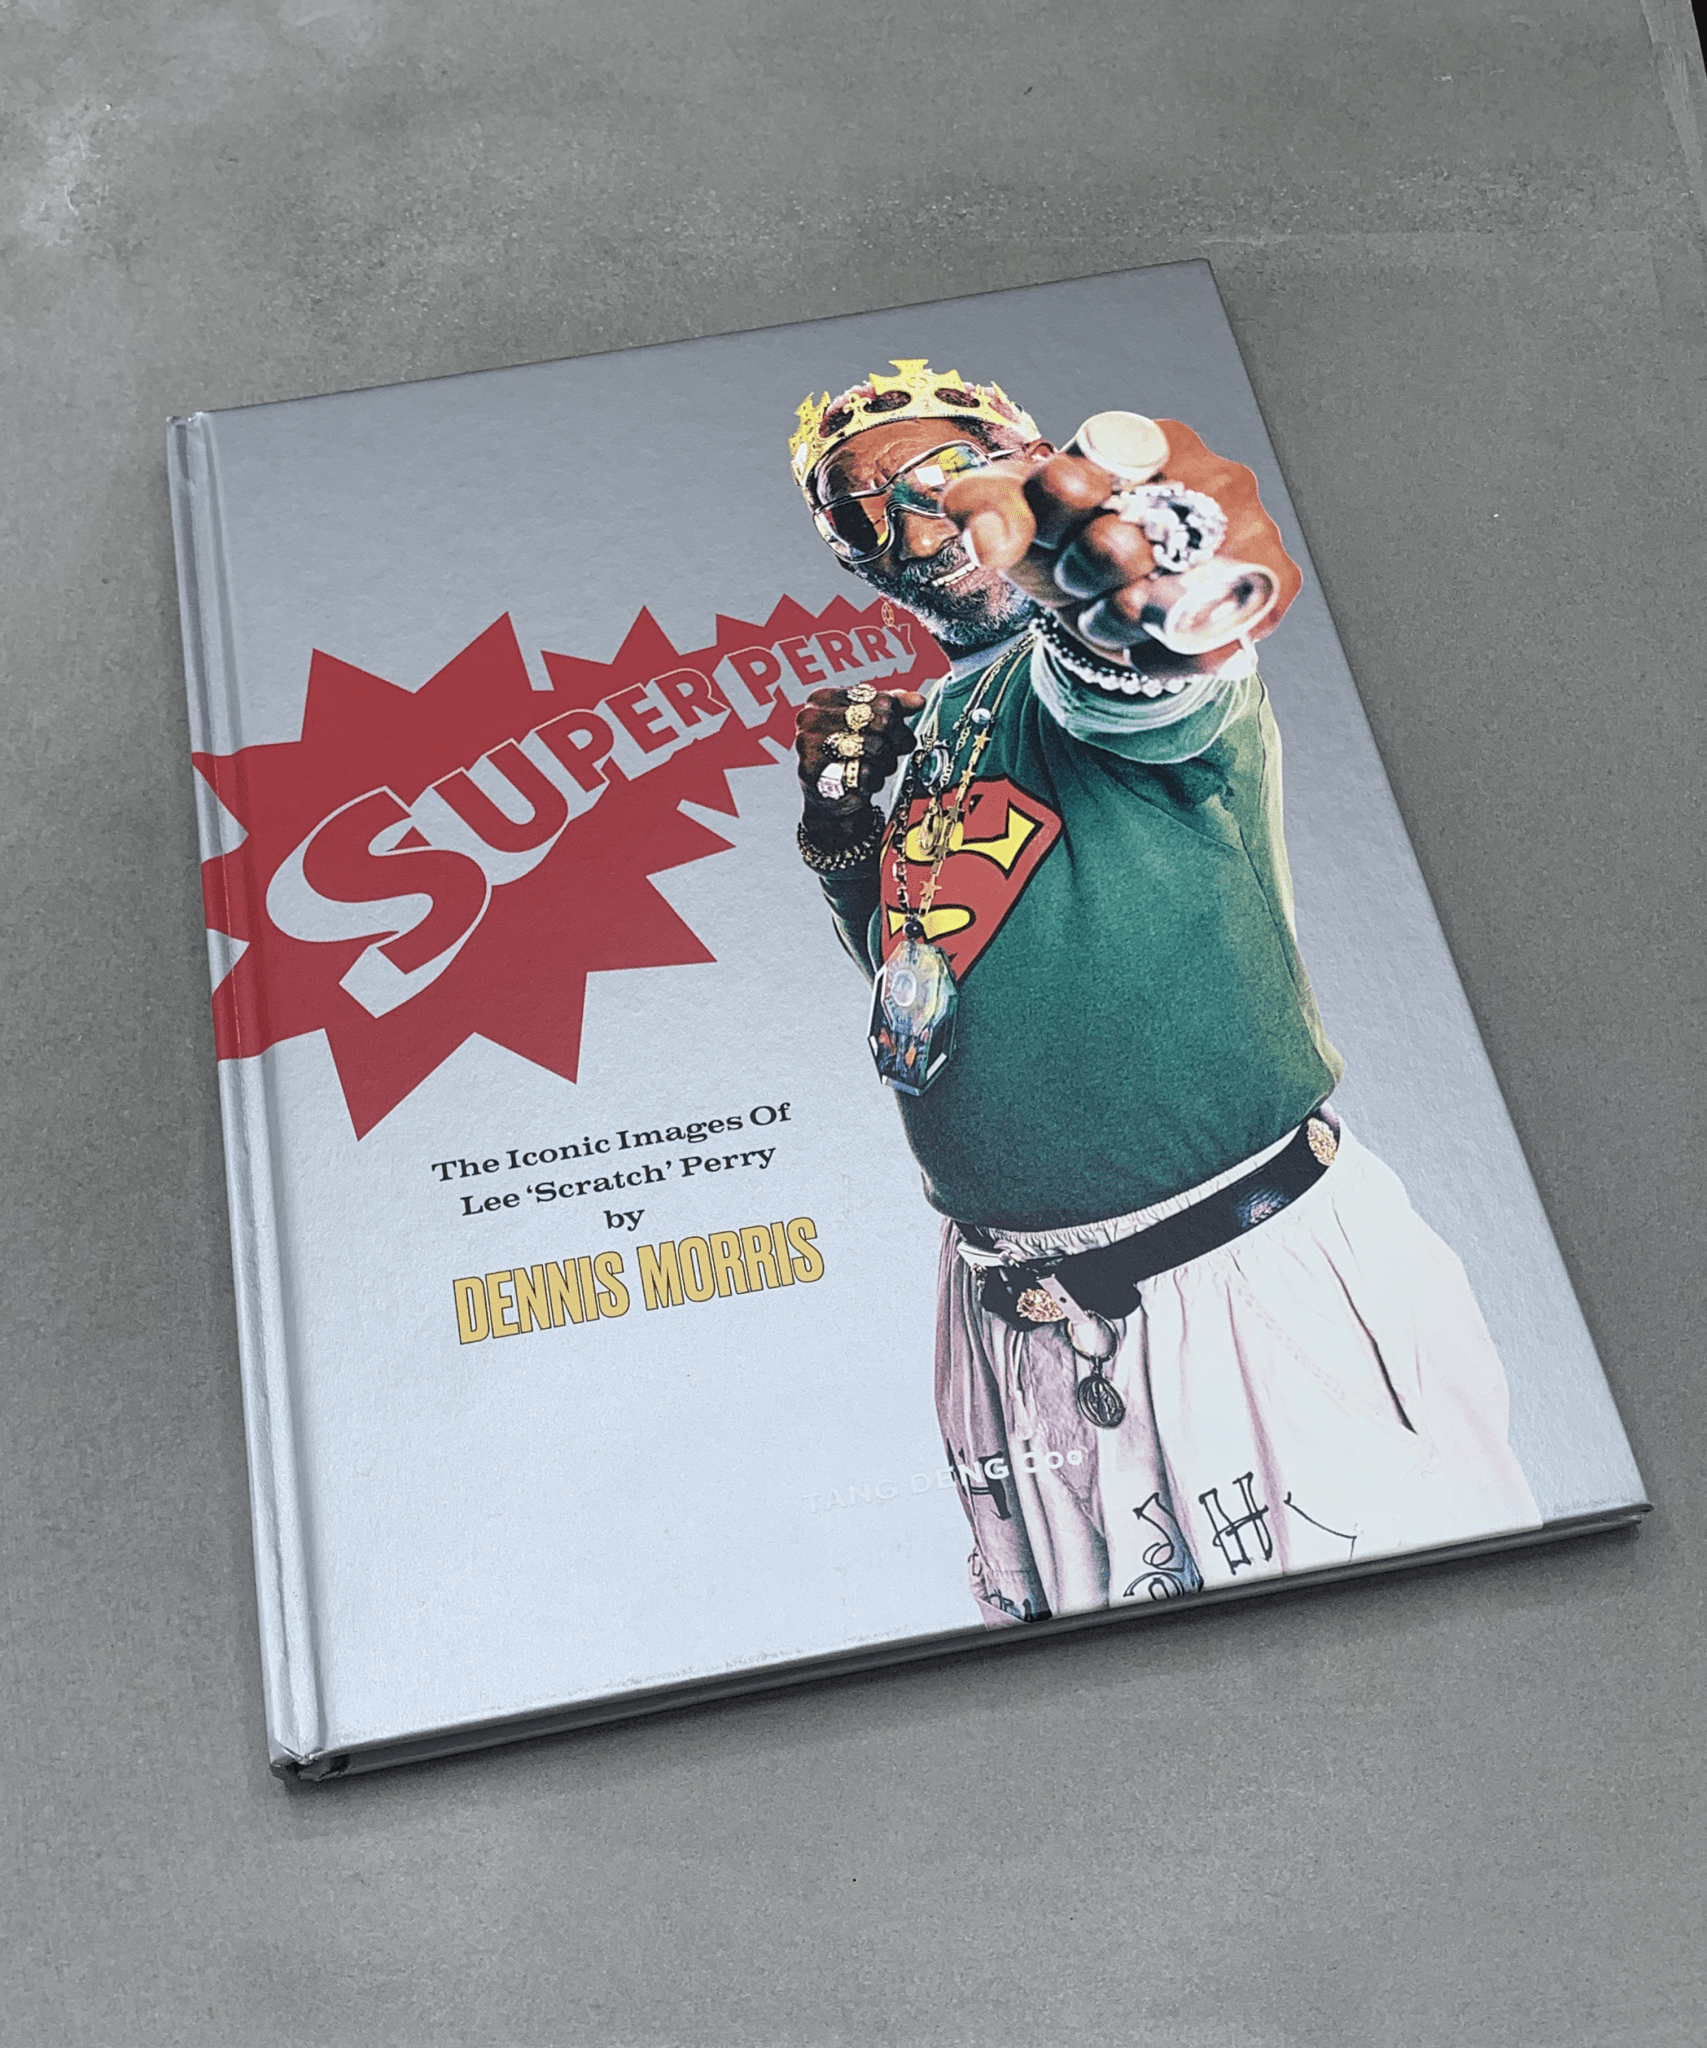 SUPER PERRY - The Iconic Images of Lee Scratch Perry - London - photobook - dub - TACO! - TACO!